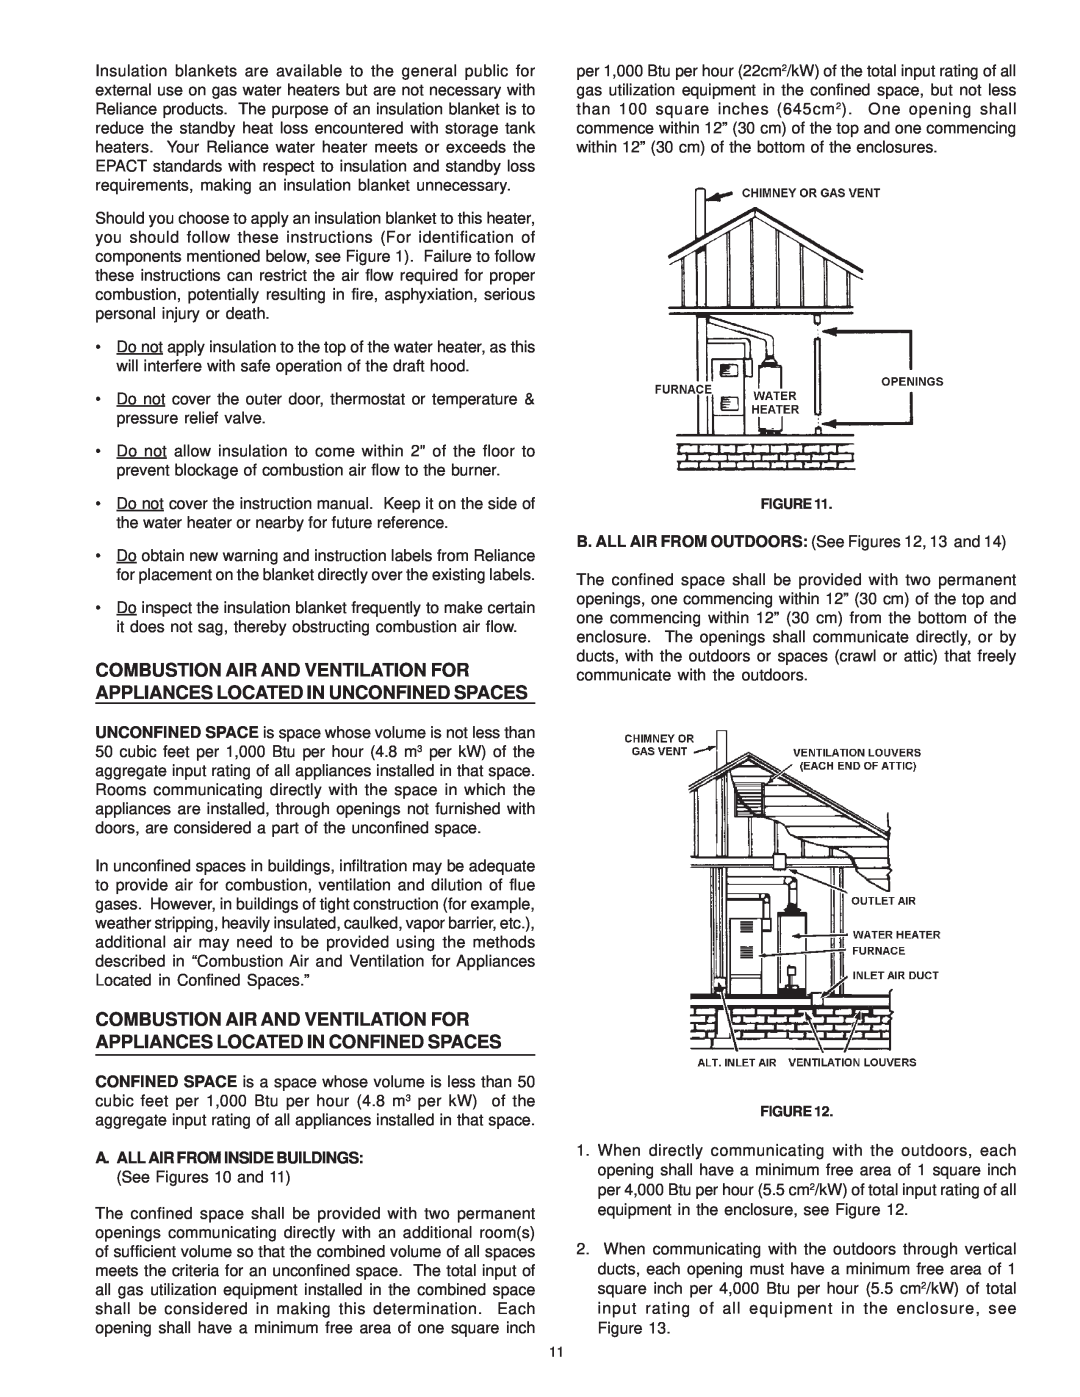 Reliance Water Heaters 606 Series, 196296-001 instruction manual B. ALL AIR FROM OUTDOORS See Figures 12, 13 and 